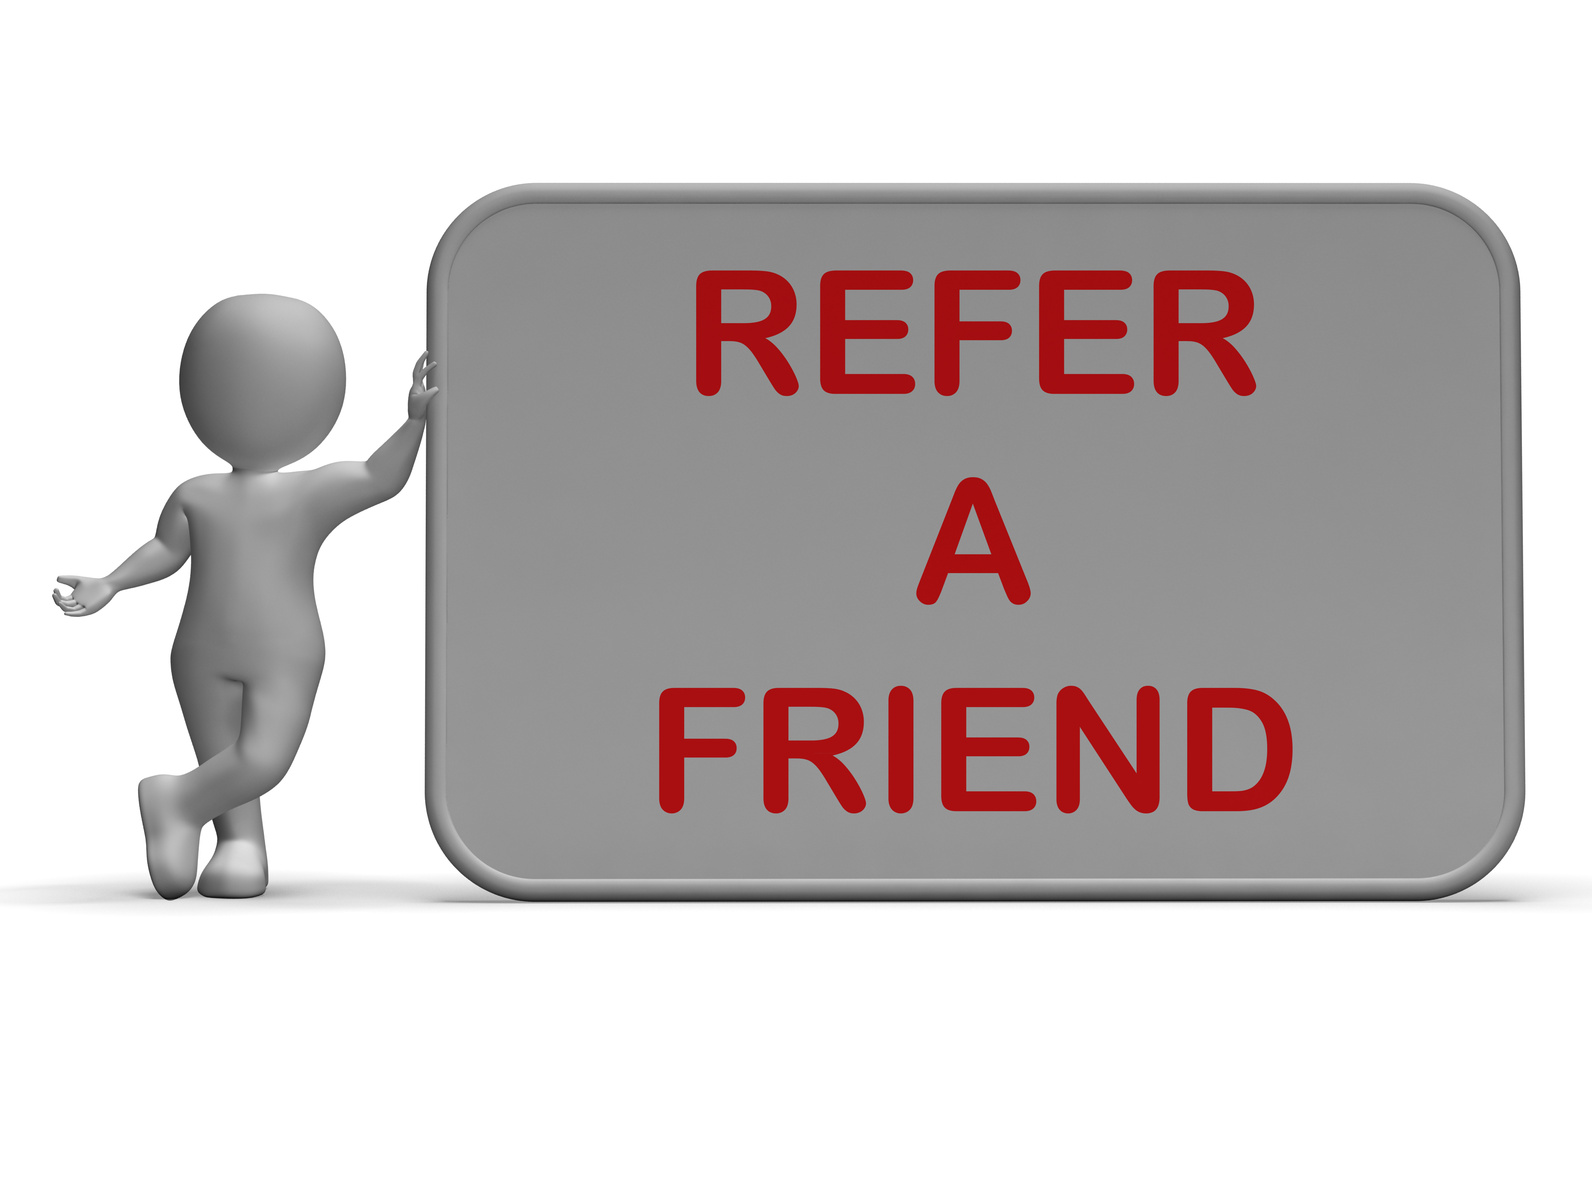 employee referral clipart - photo #26